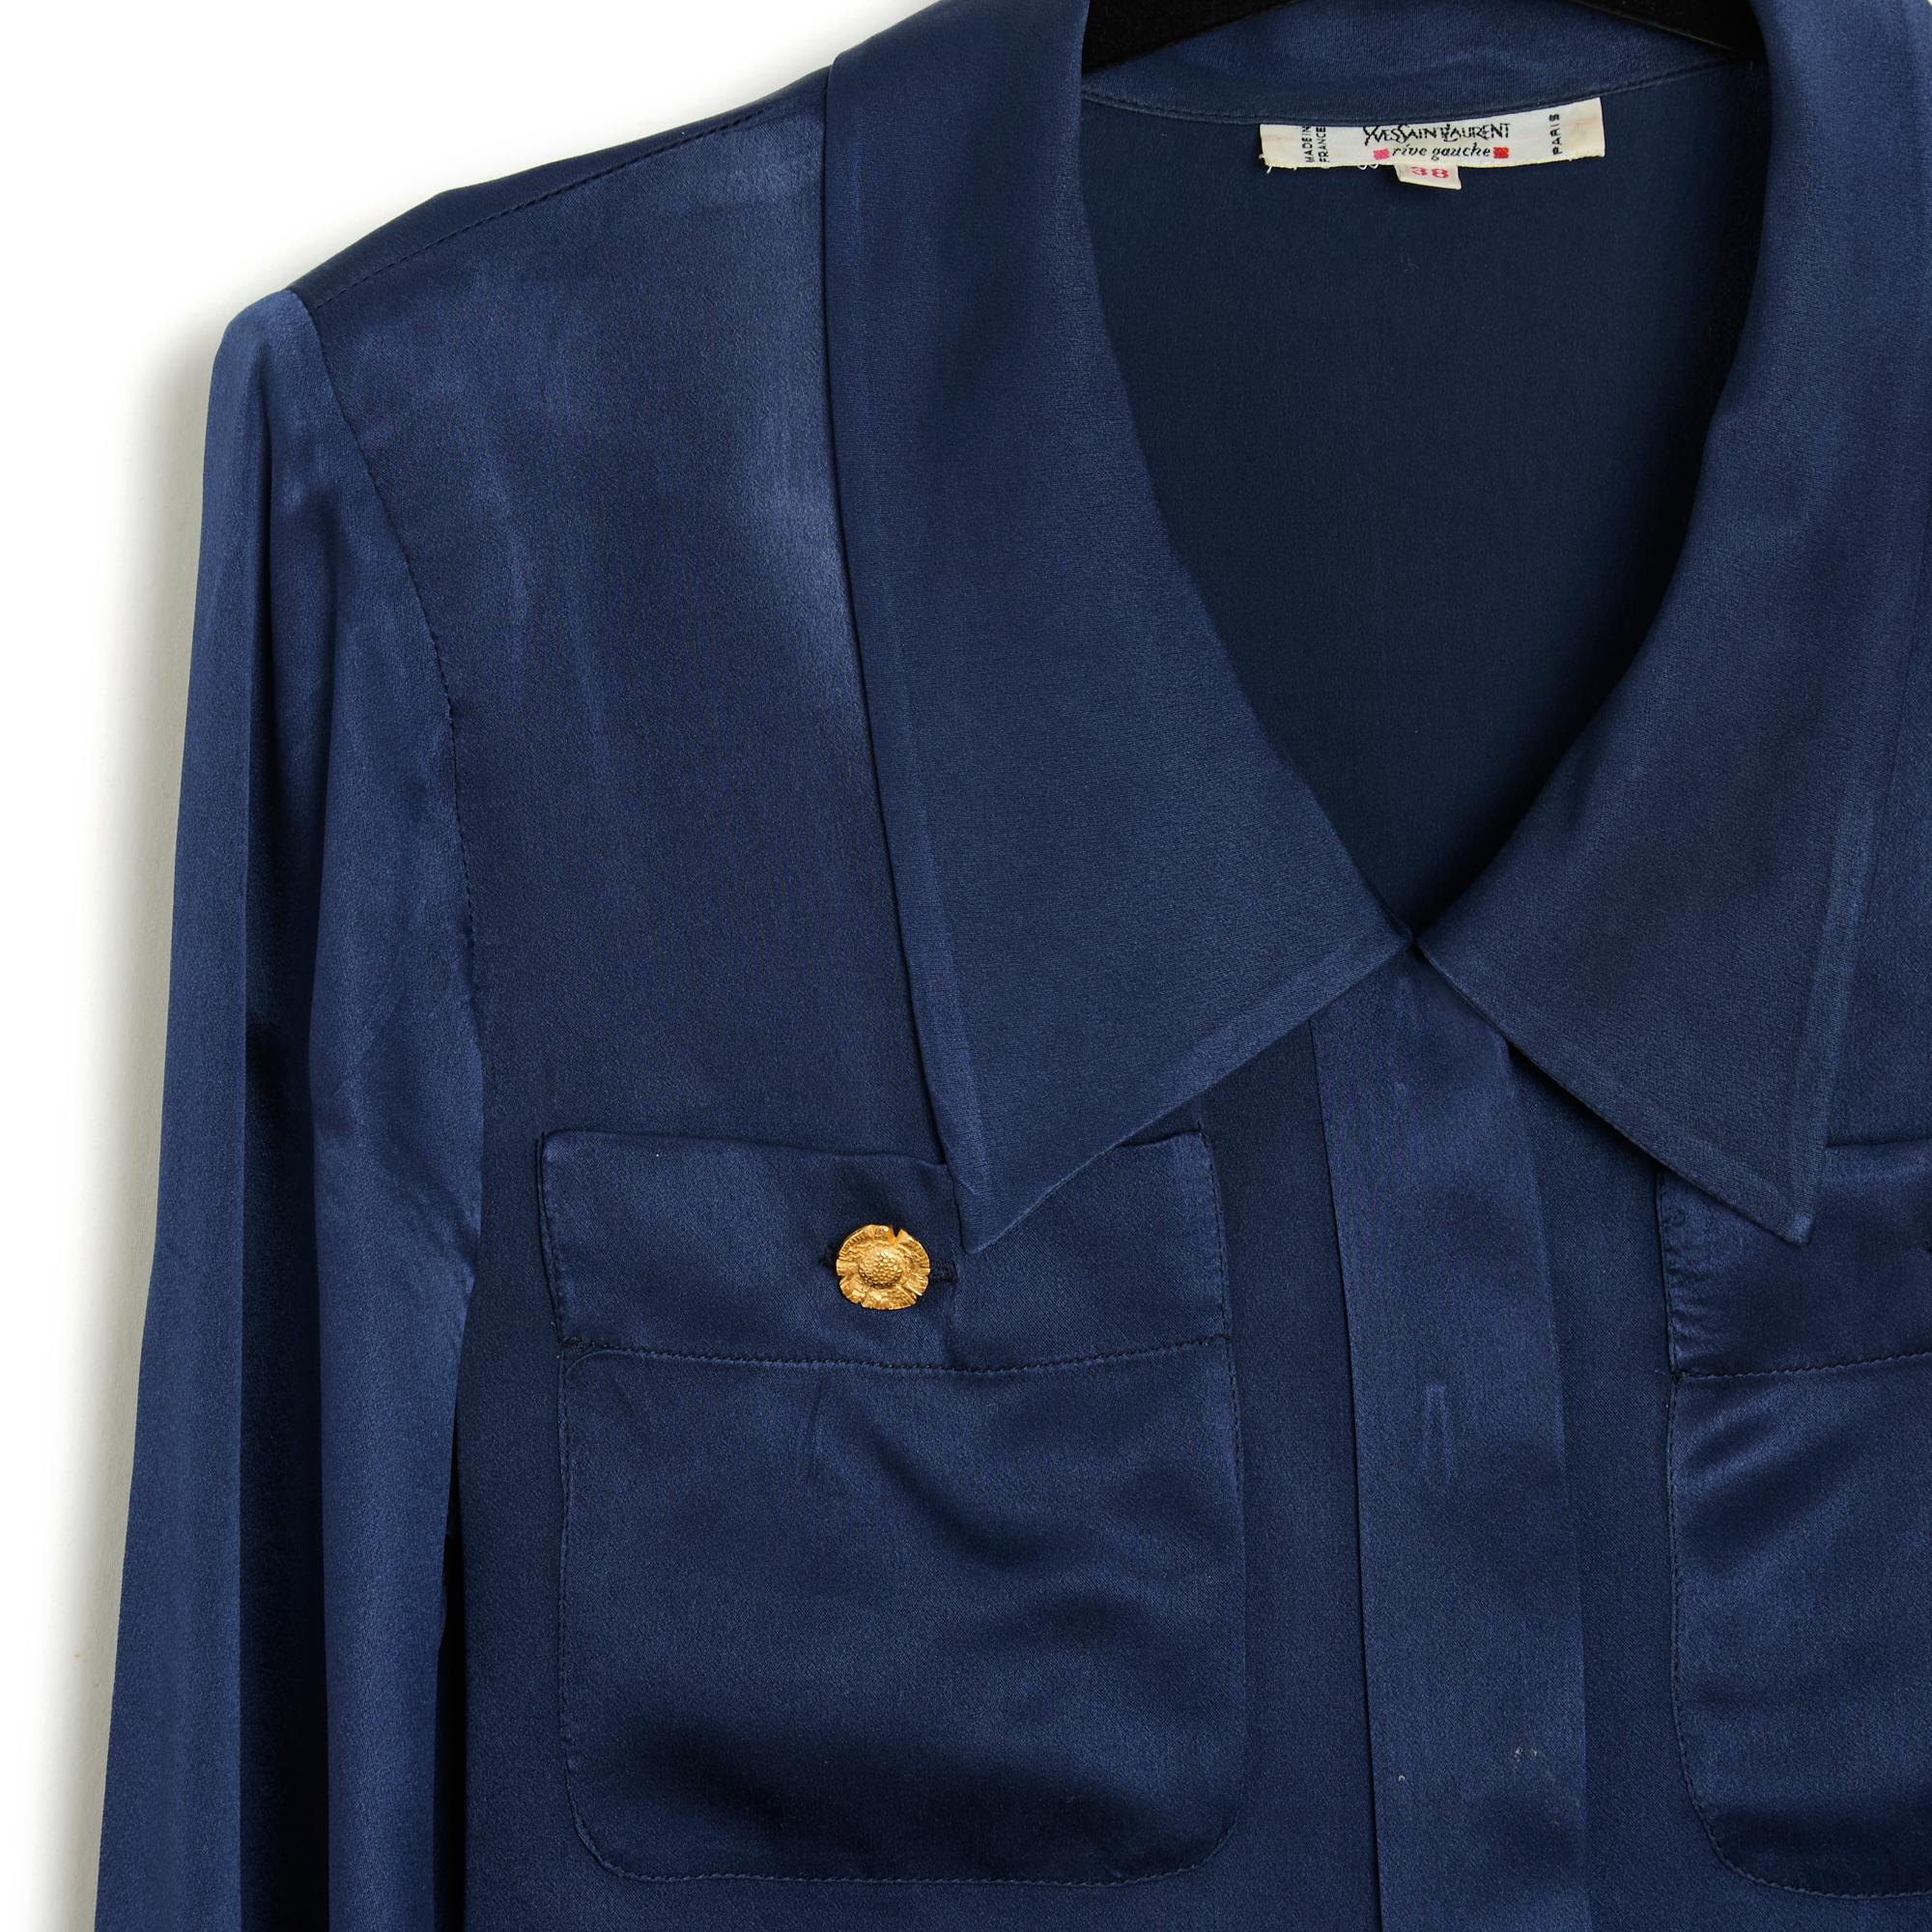 Top Yves Saint Laurent YSL Rive Gauche blouse in navy blue silk satin, classic dropped collar, closed in front with 6 hidden buttons, 2 buttoned patch pockets, long buttoned sleeves, small shoulder pads. Size 38FR: middle 38 cm, chest 45 cm, length